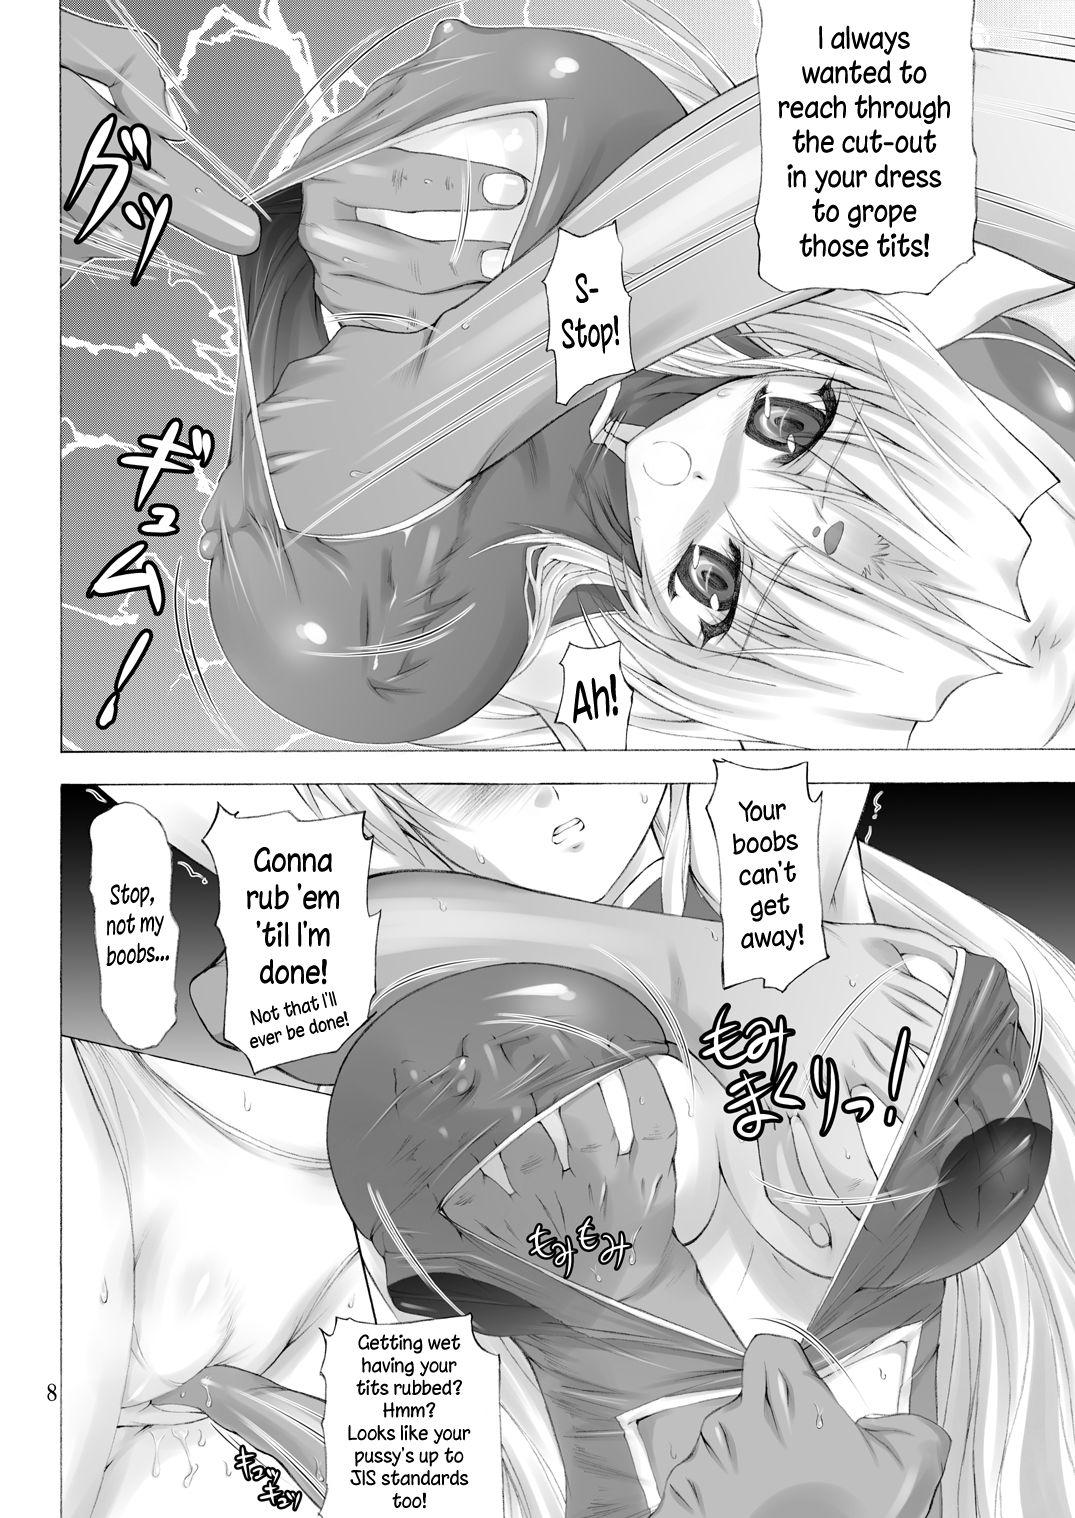 Tied Super Rinpha Time! - Galaxy angel Gritona - Page 7